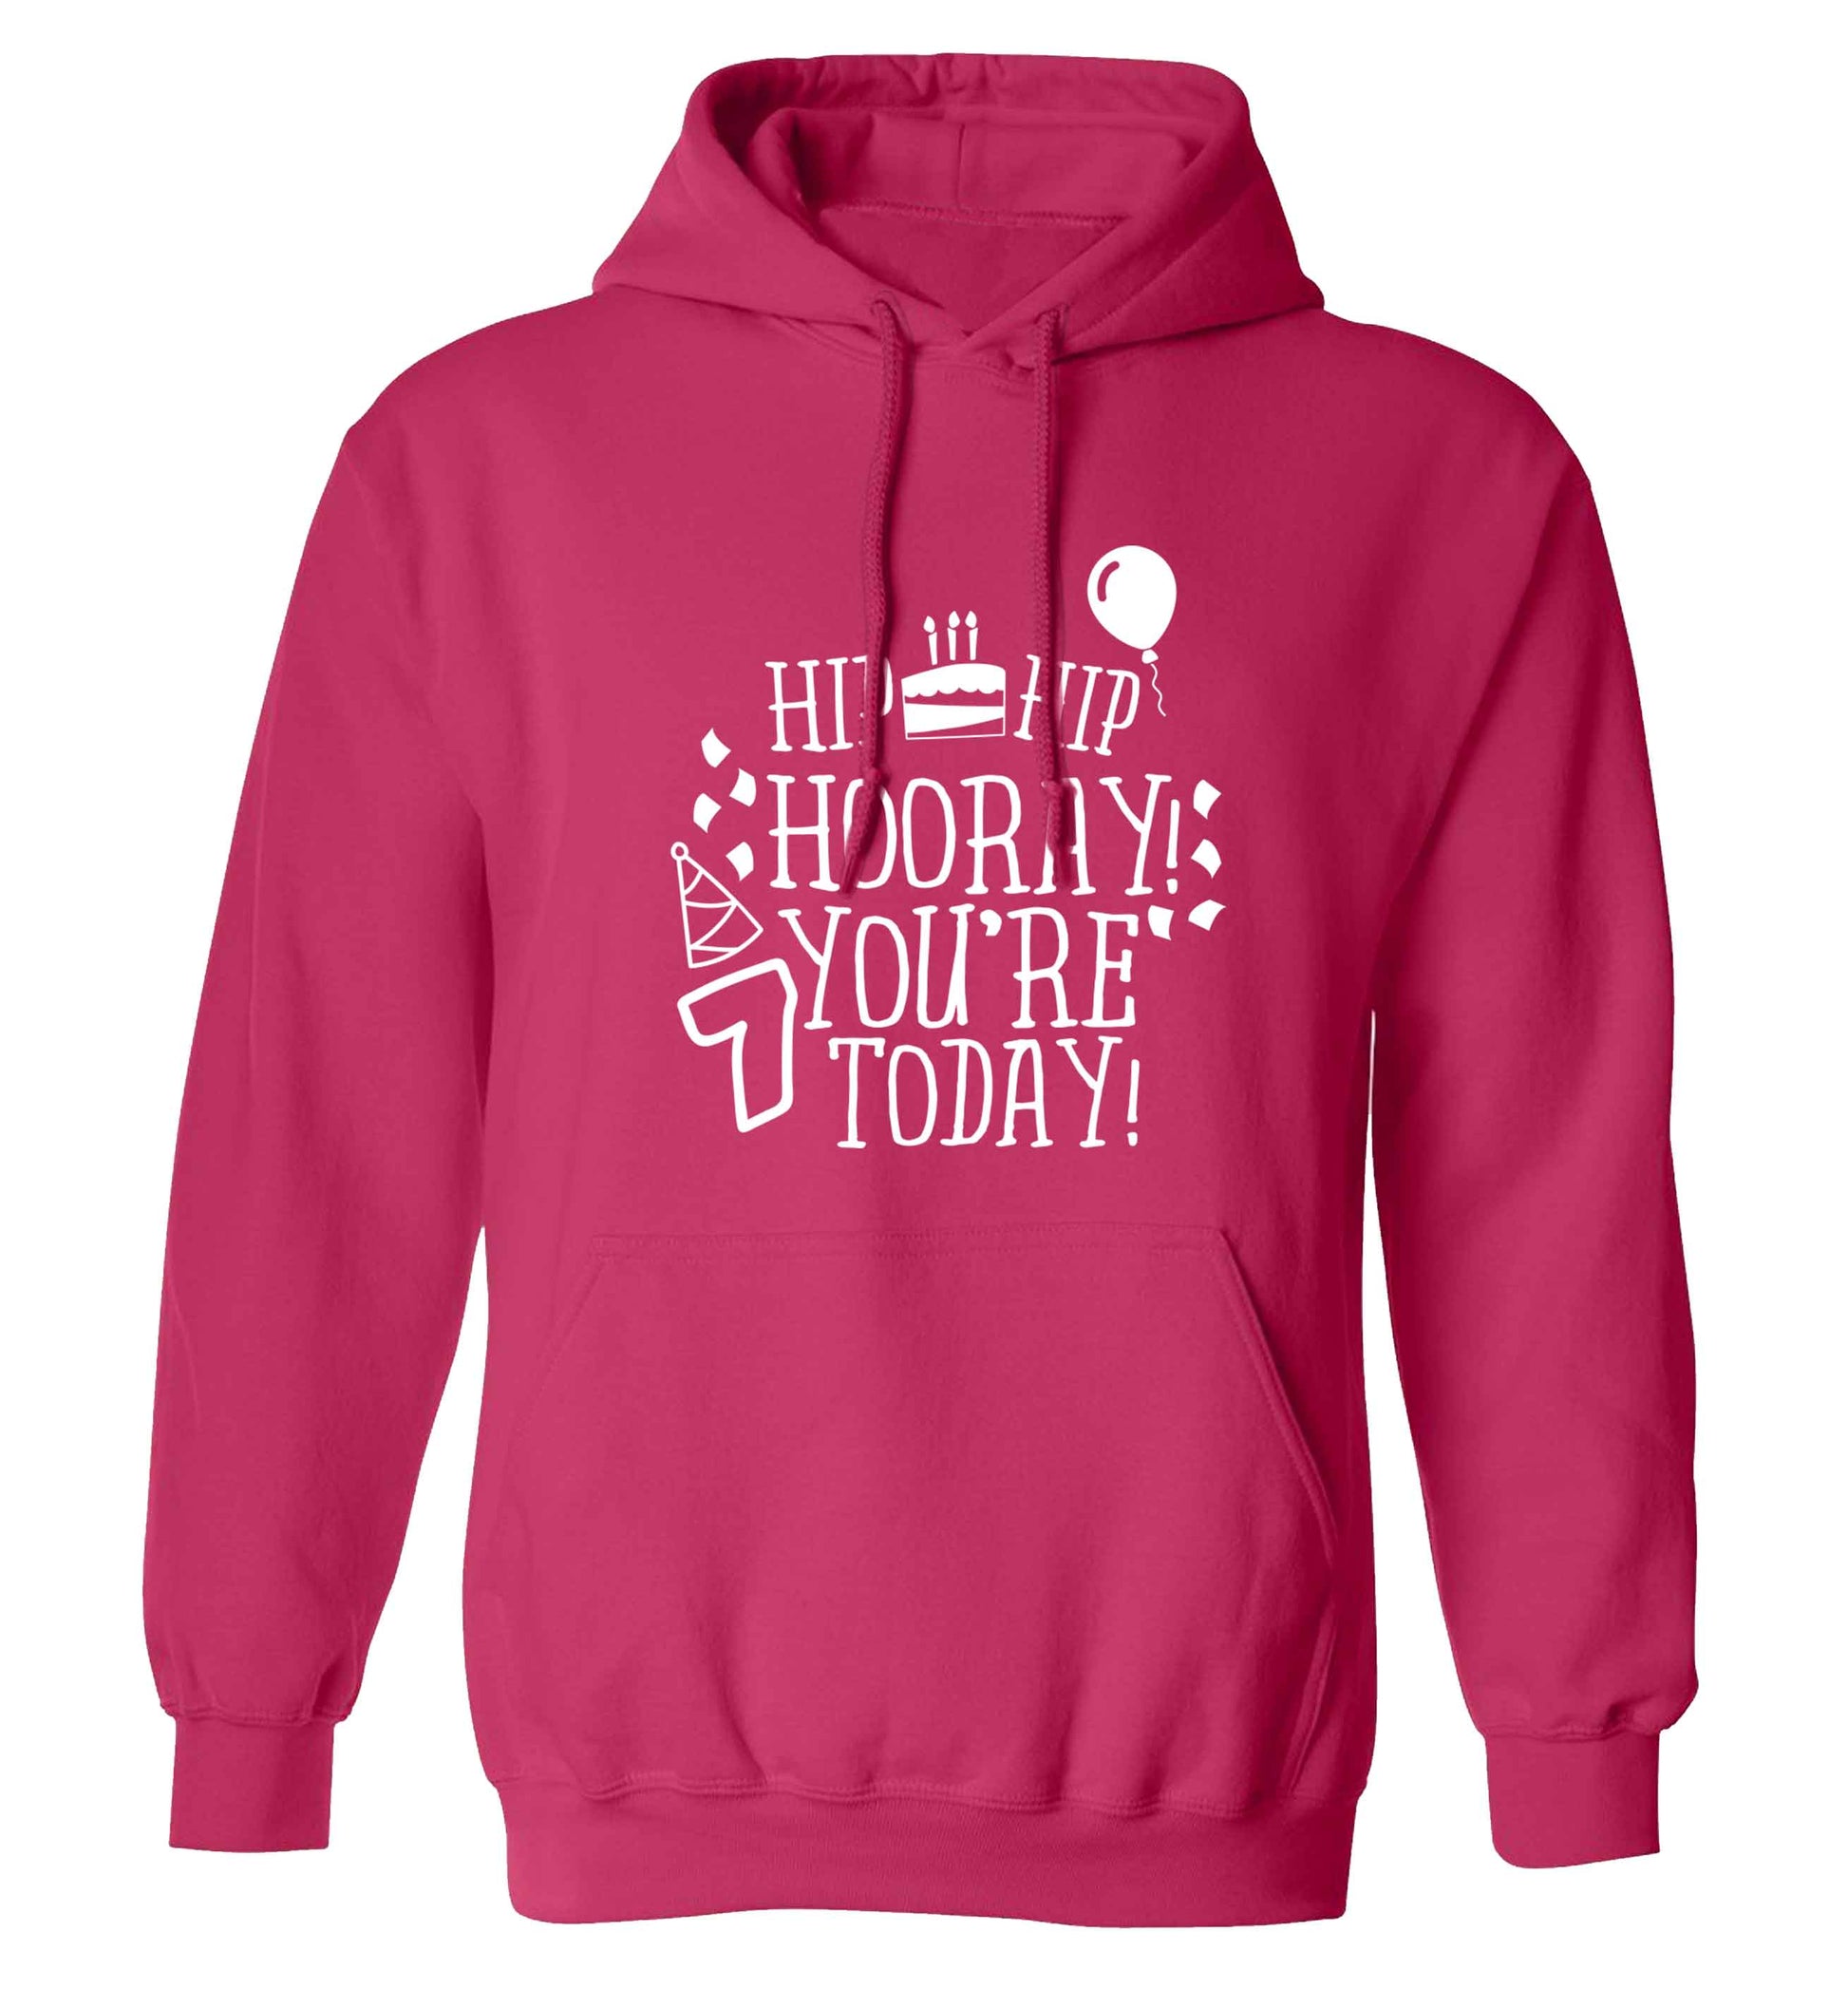 Hip hip hooray you're seven today! adults unisex pink hoodie 2XL